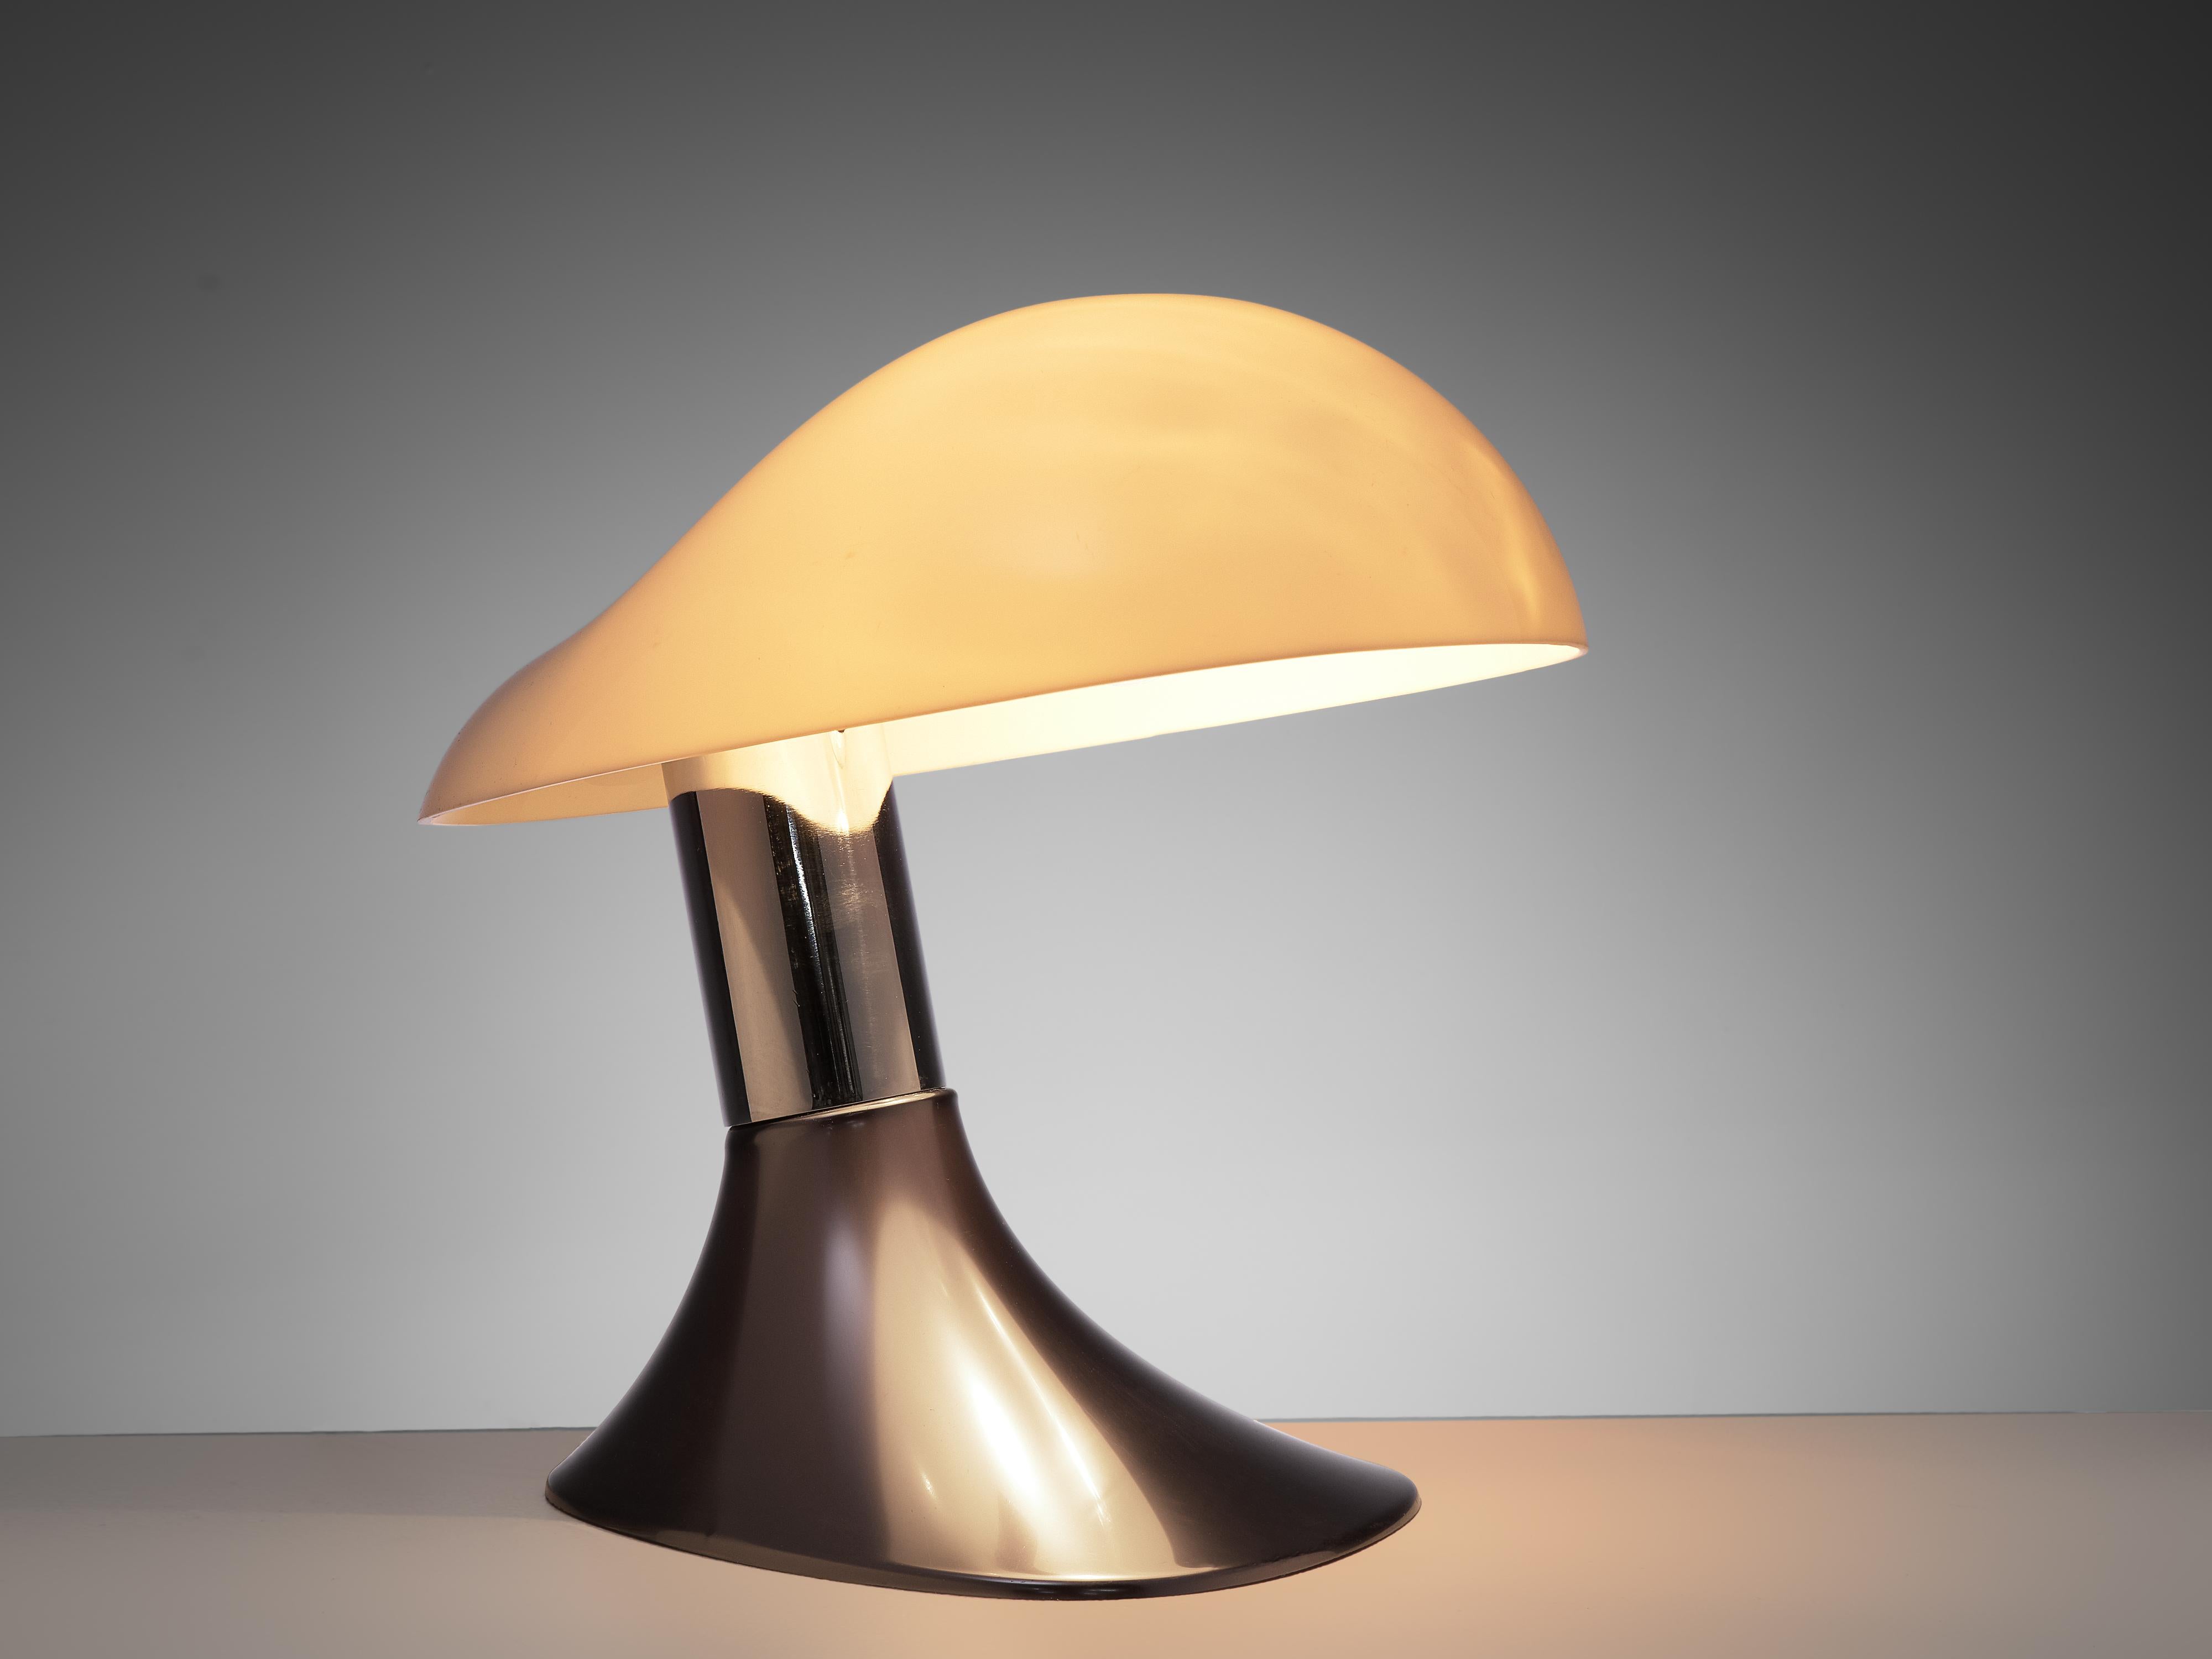 Guzzini, table lamp, metal, plastic, Italy, 1970s.

A Postmodern table lamp from Italy that features a dark foot and tilted metal base and a big shape on top. This shape of the lamp makes it a true eyecatcher even when not in use and gives it an